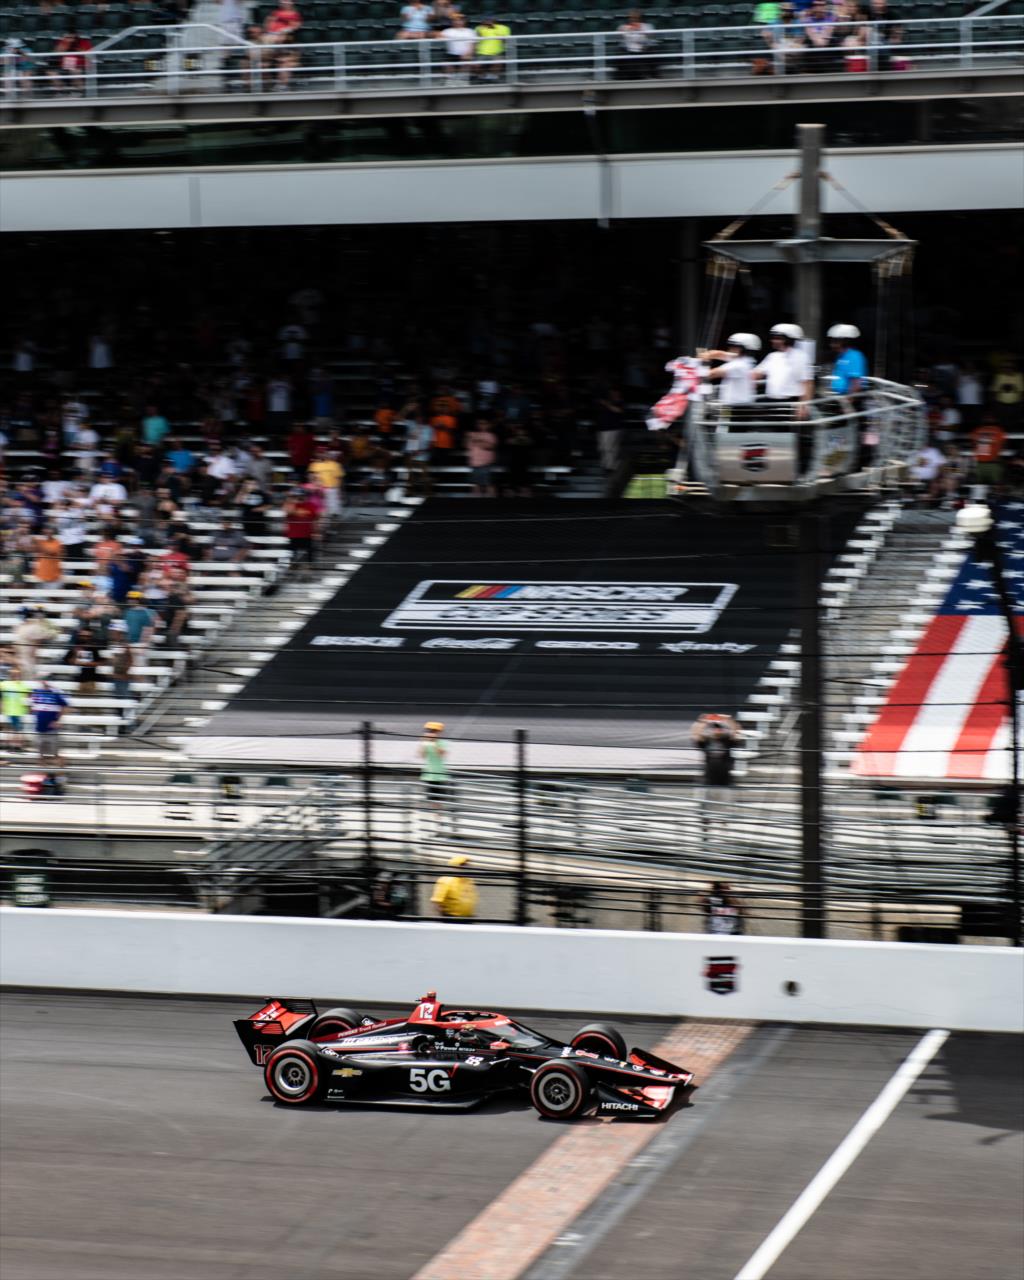 Will Power crosses the famed Yard of Bricks to win the Big Machine Spiked Coolers Grand Prix. It was his fifth win on the IMS road course and 40th career INDYCAR win. -- Photo by: Karl Zemlin